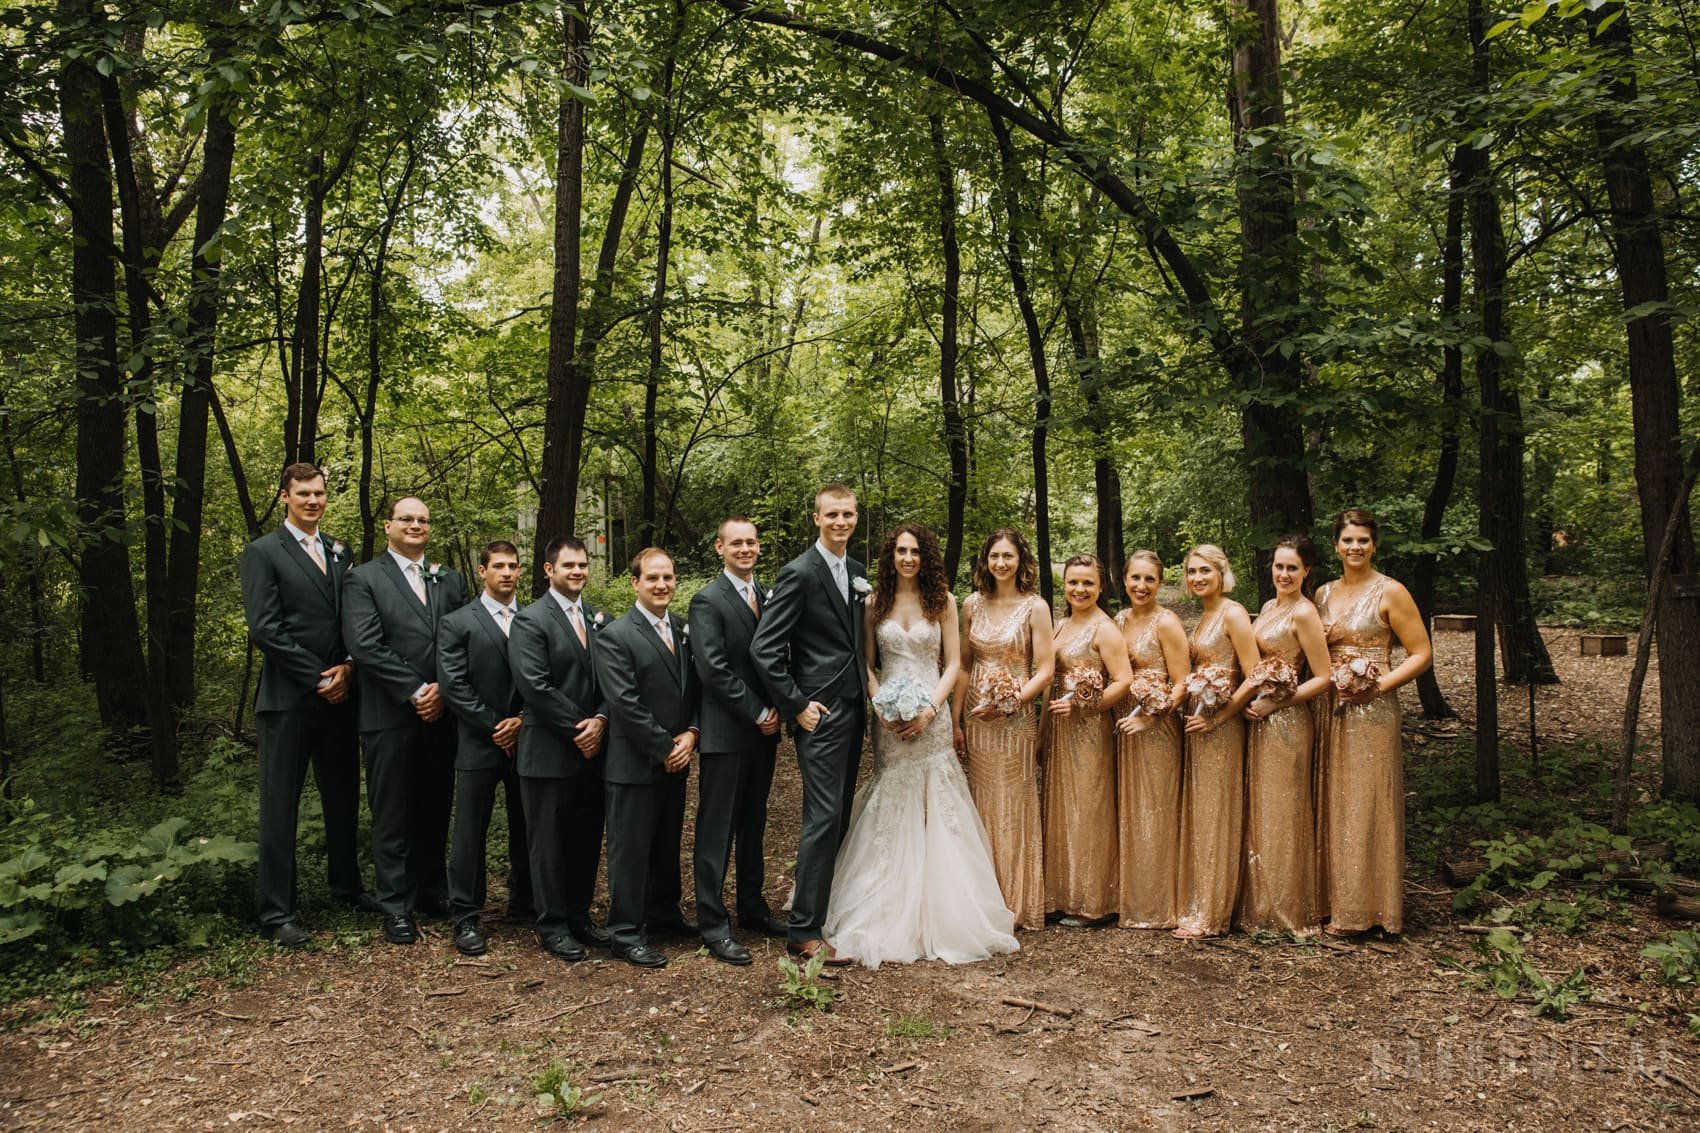 Camp-wooded-wedding-style-midwest-wi-bridal-party-300.jpg.jpg